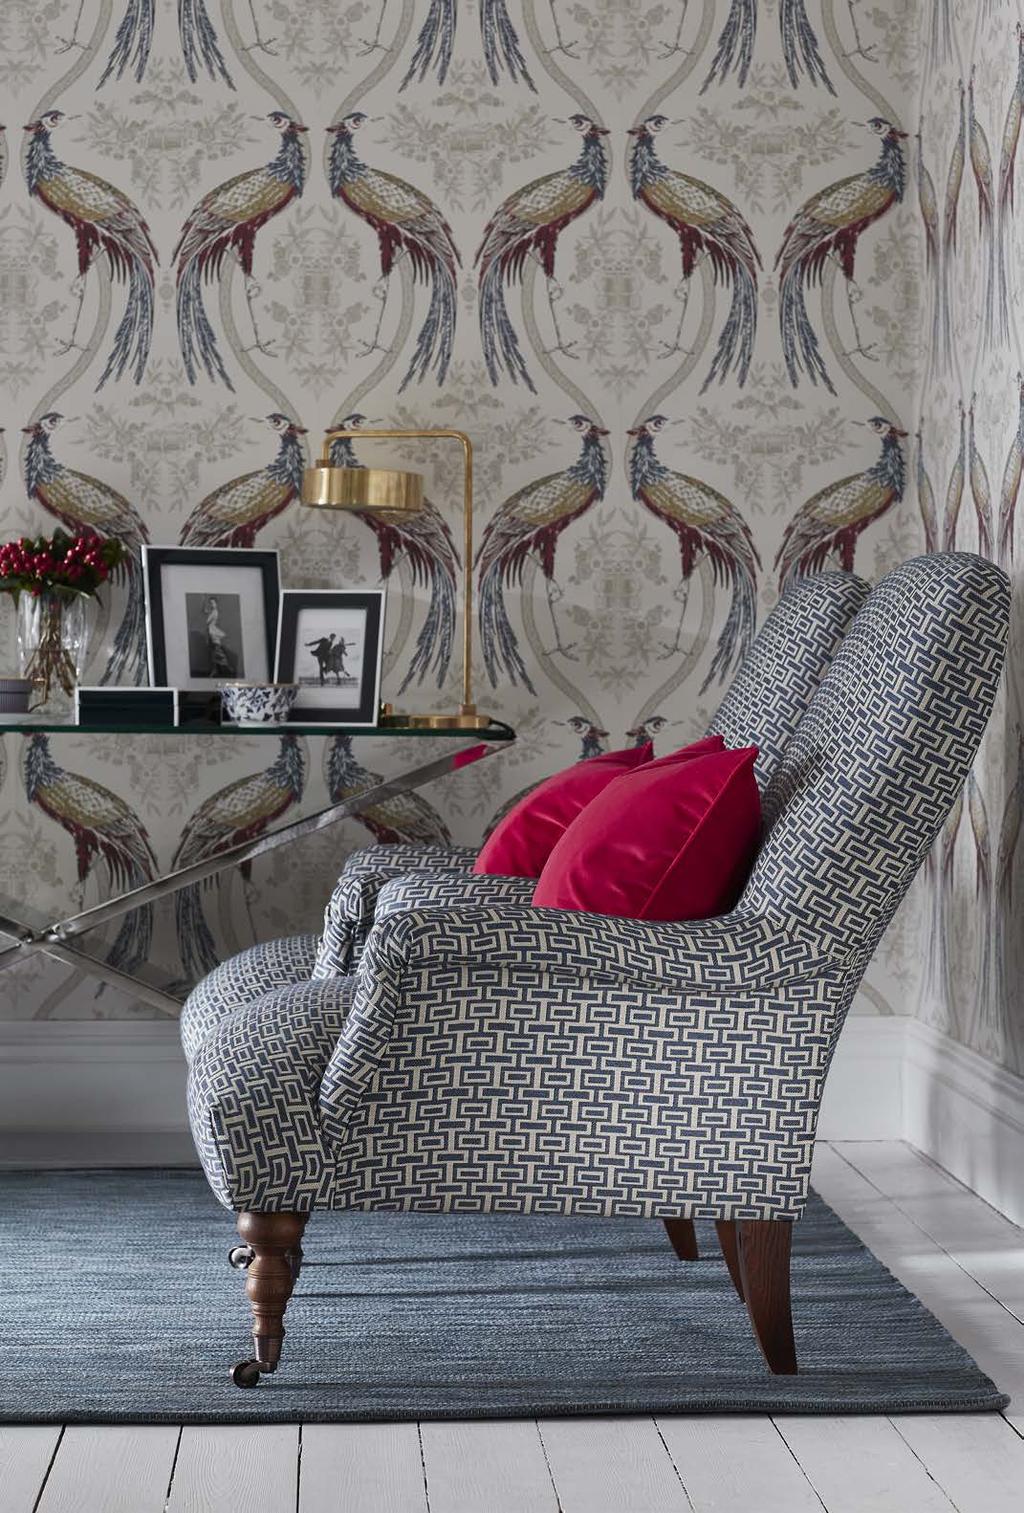 INTAGLIO Contemporary meets classical with the Intaglio pattern, which combines several embossed textures, popular during the Georgian era, into a modern and stylish design.